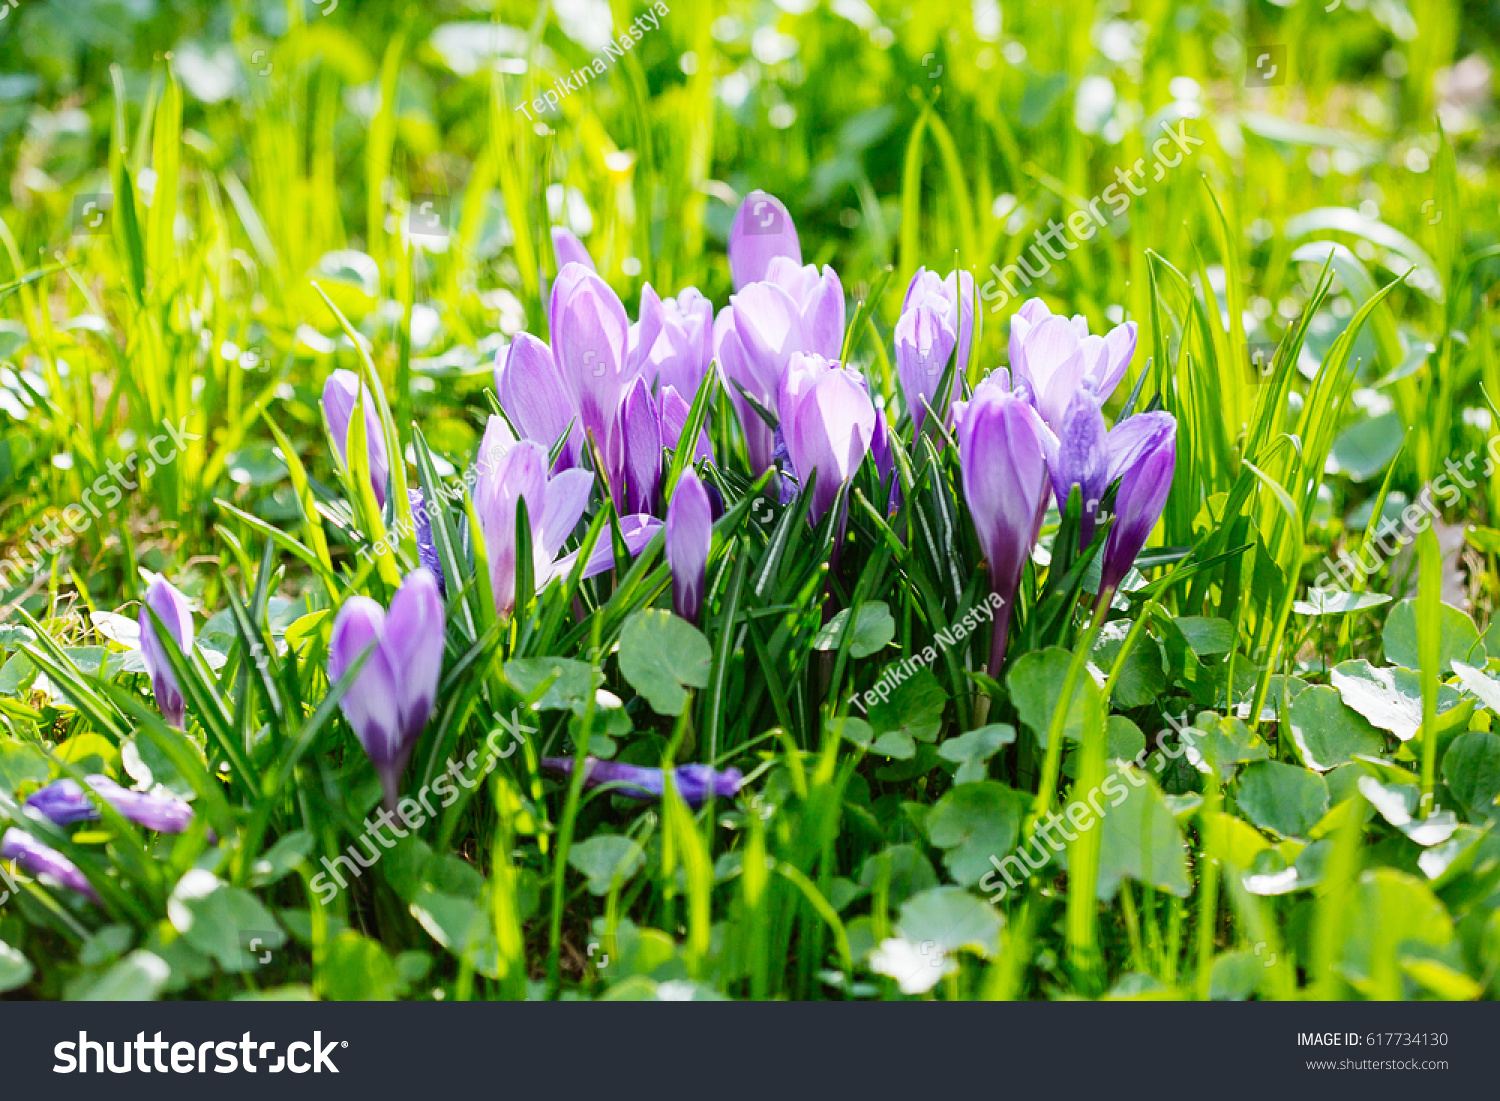 Group of Purple crocus (crocus sativus) with selective/soft focus and diffused background in early spring, #617734130